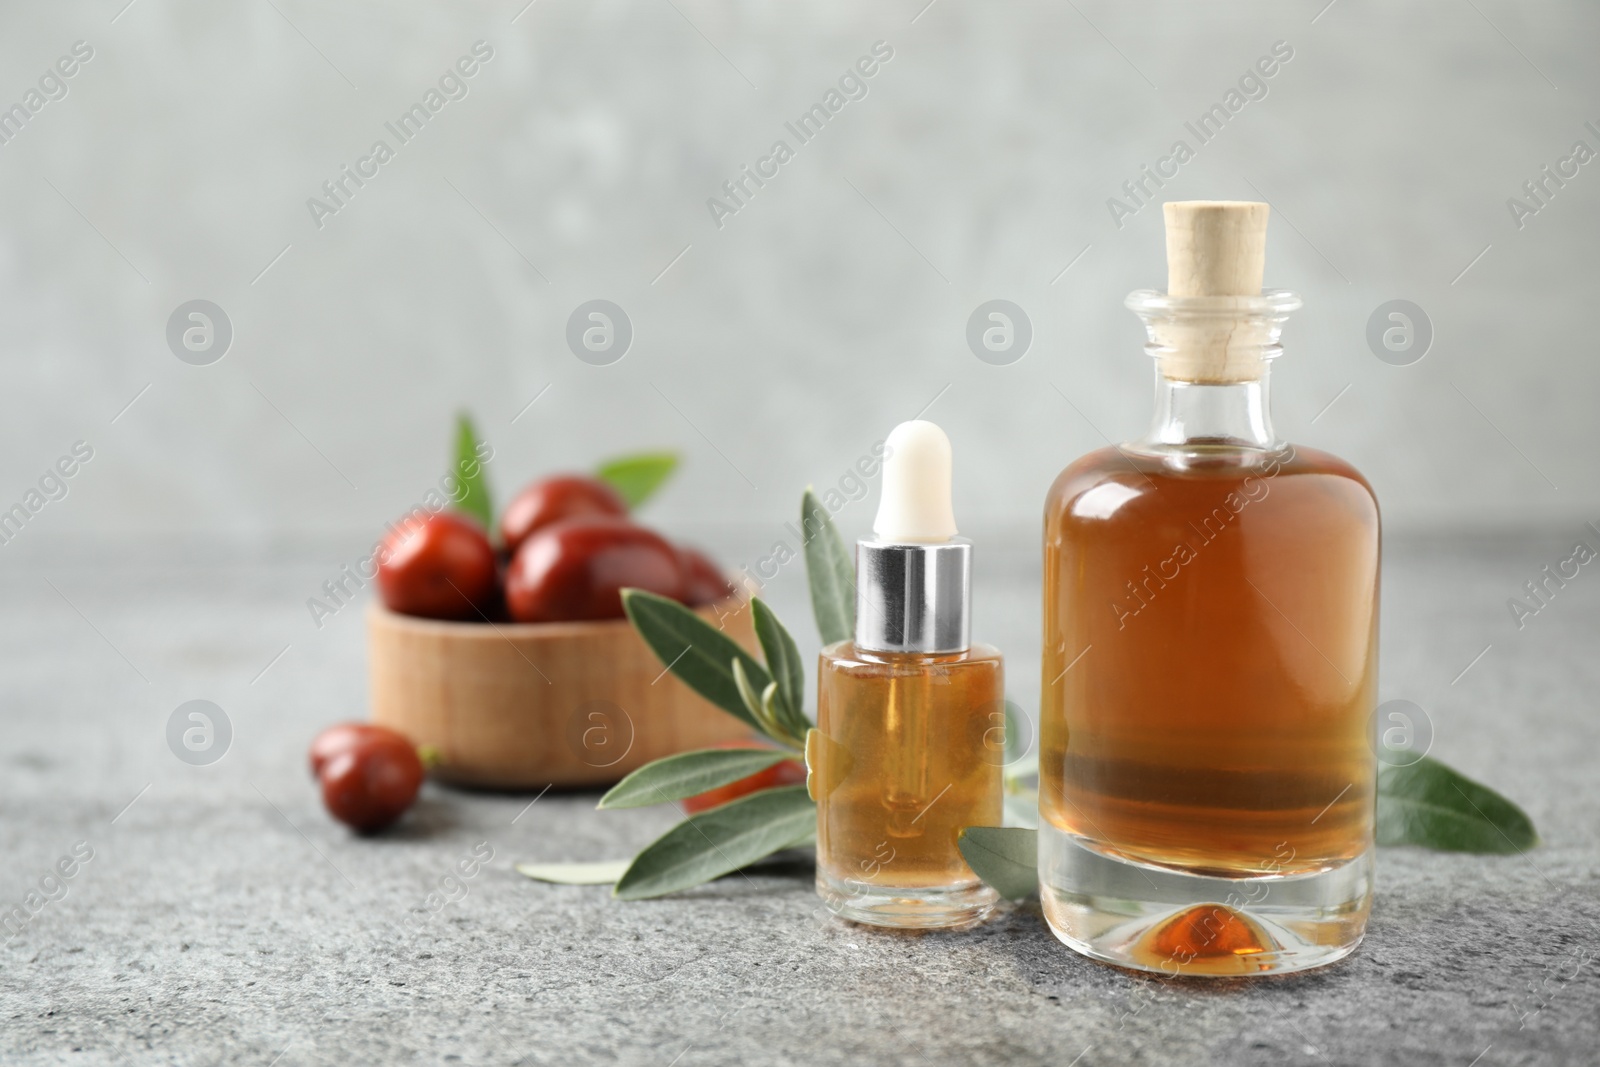 Photo of Glass bottles with jojoba oil on stone table against grey background. Space for text